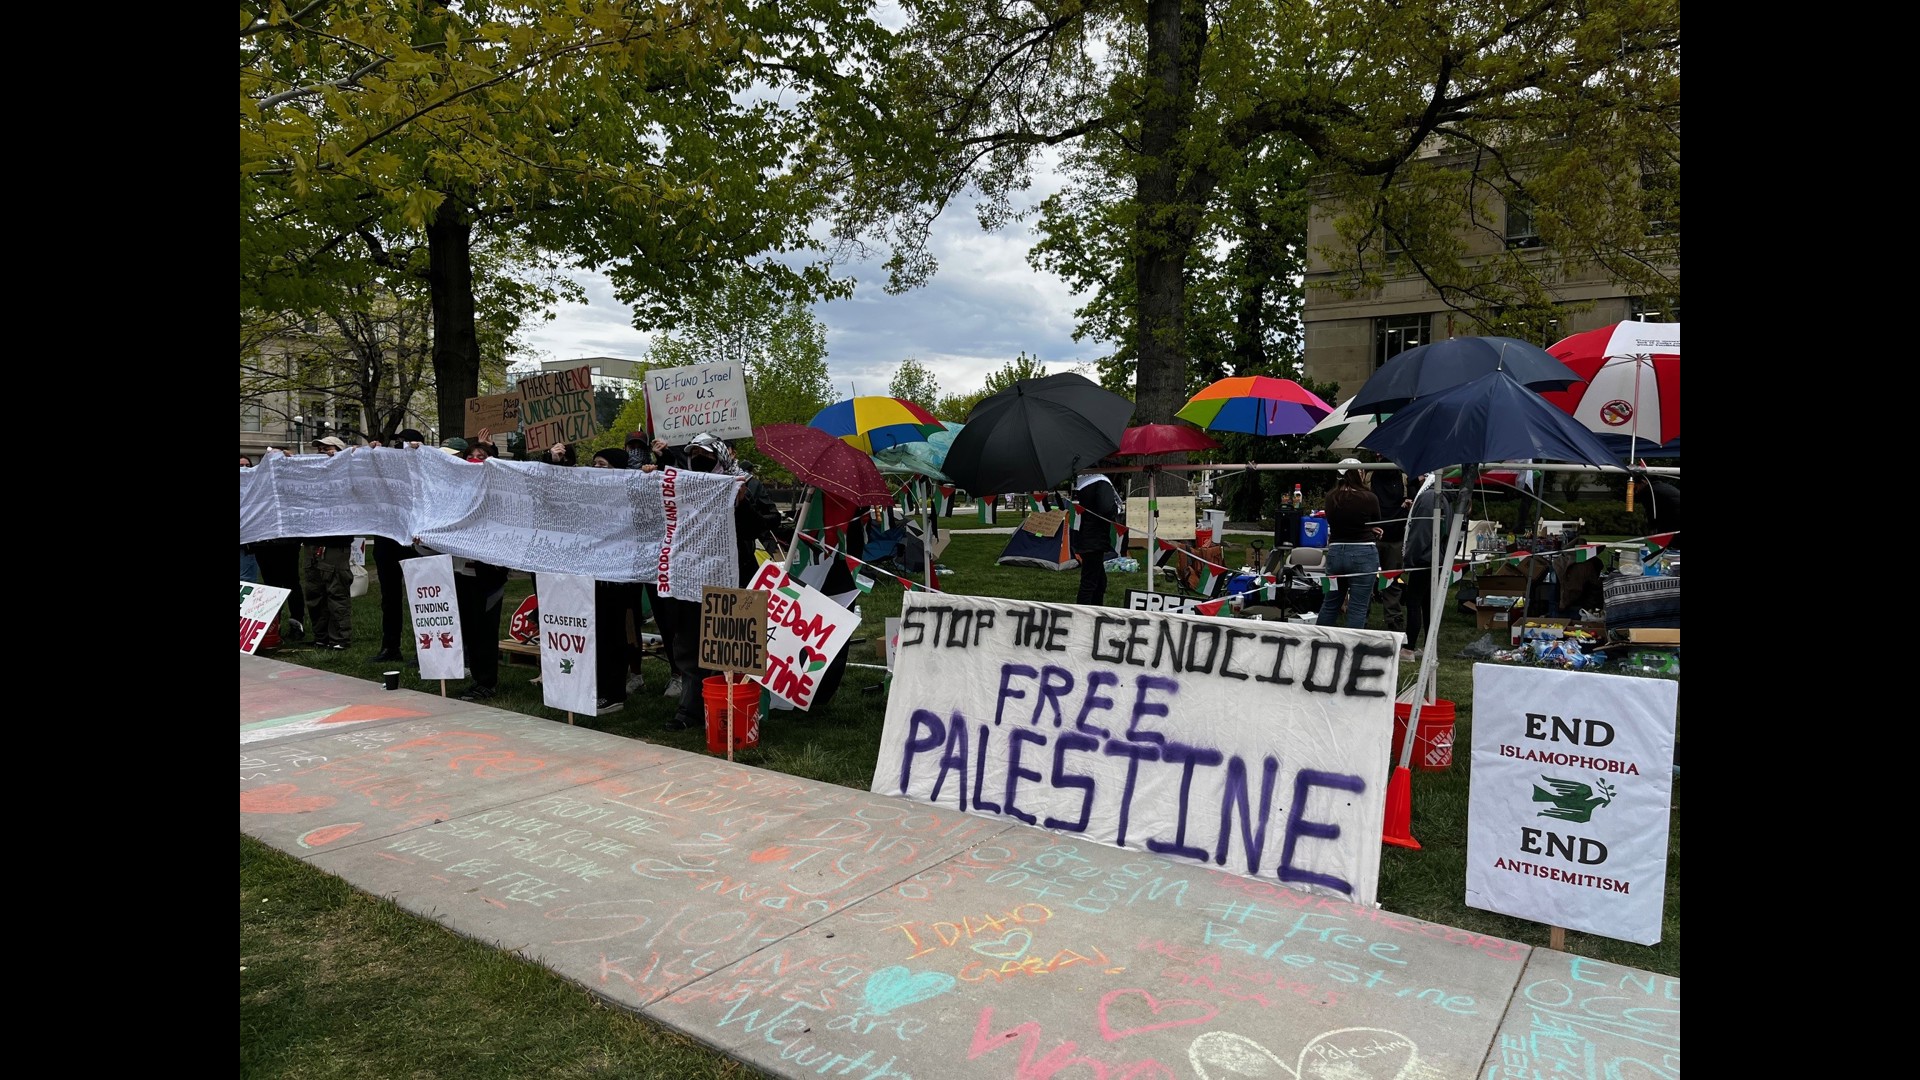 "This should never happen to any group of people ever again." A Boise to Palestine member said they will try to remain until their voices are heard.